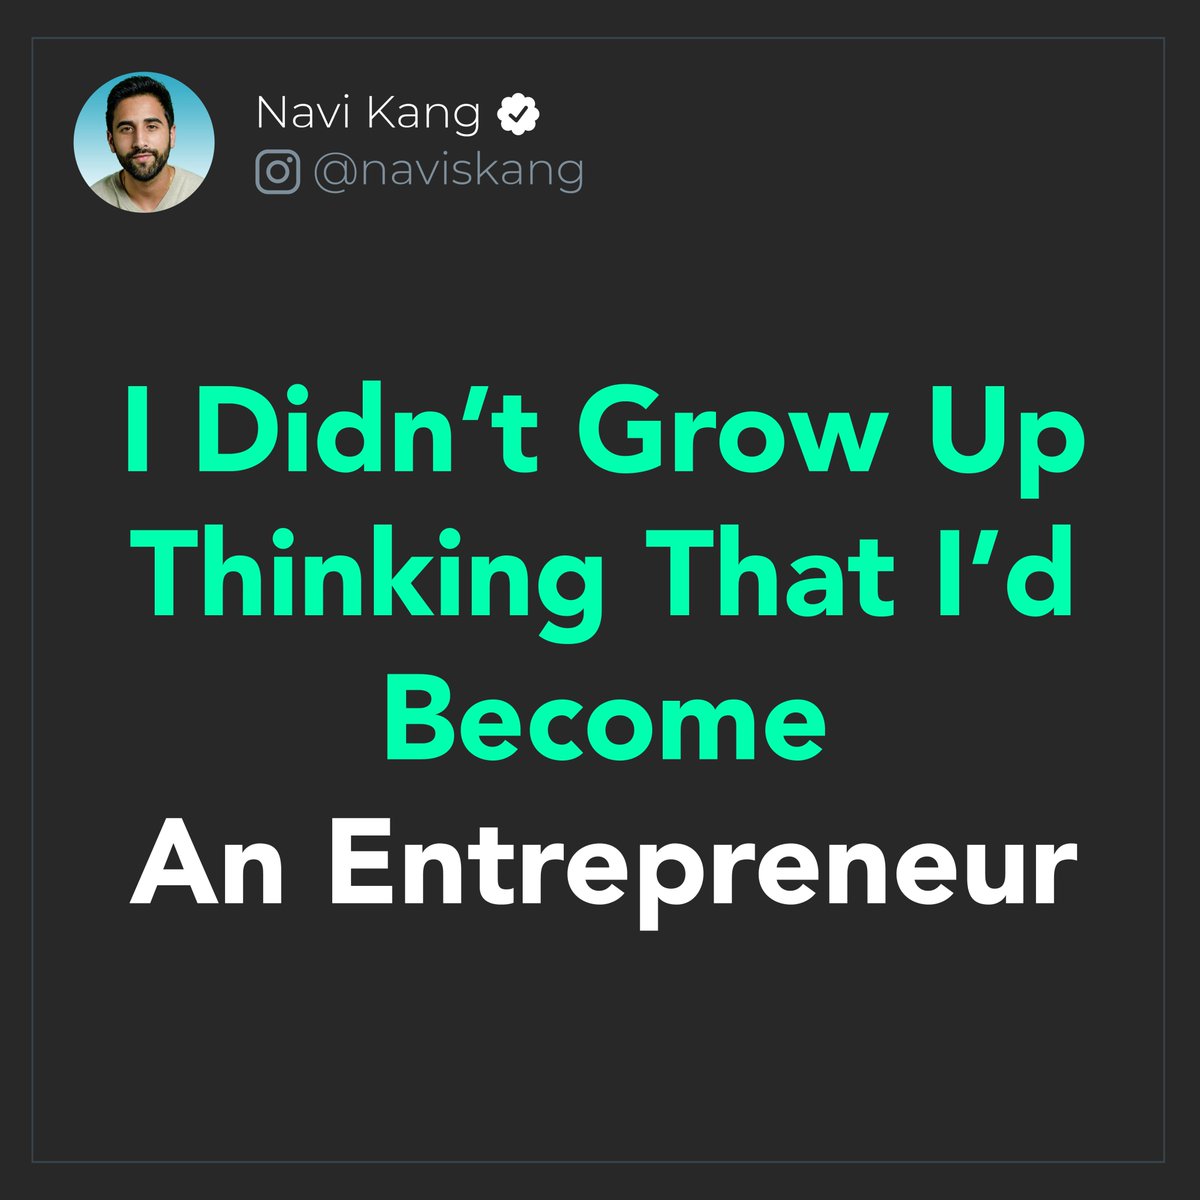 Growing up I had no idea what an ‘entrepreneur’ was, let alone have the thought of becoming one.However, there are a few behaviors that I've learned about myself that I tend to think align well with the nature of entrepreneurship. Maybe you can relate.